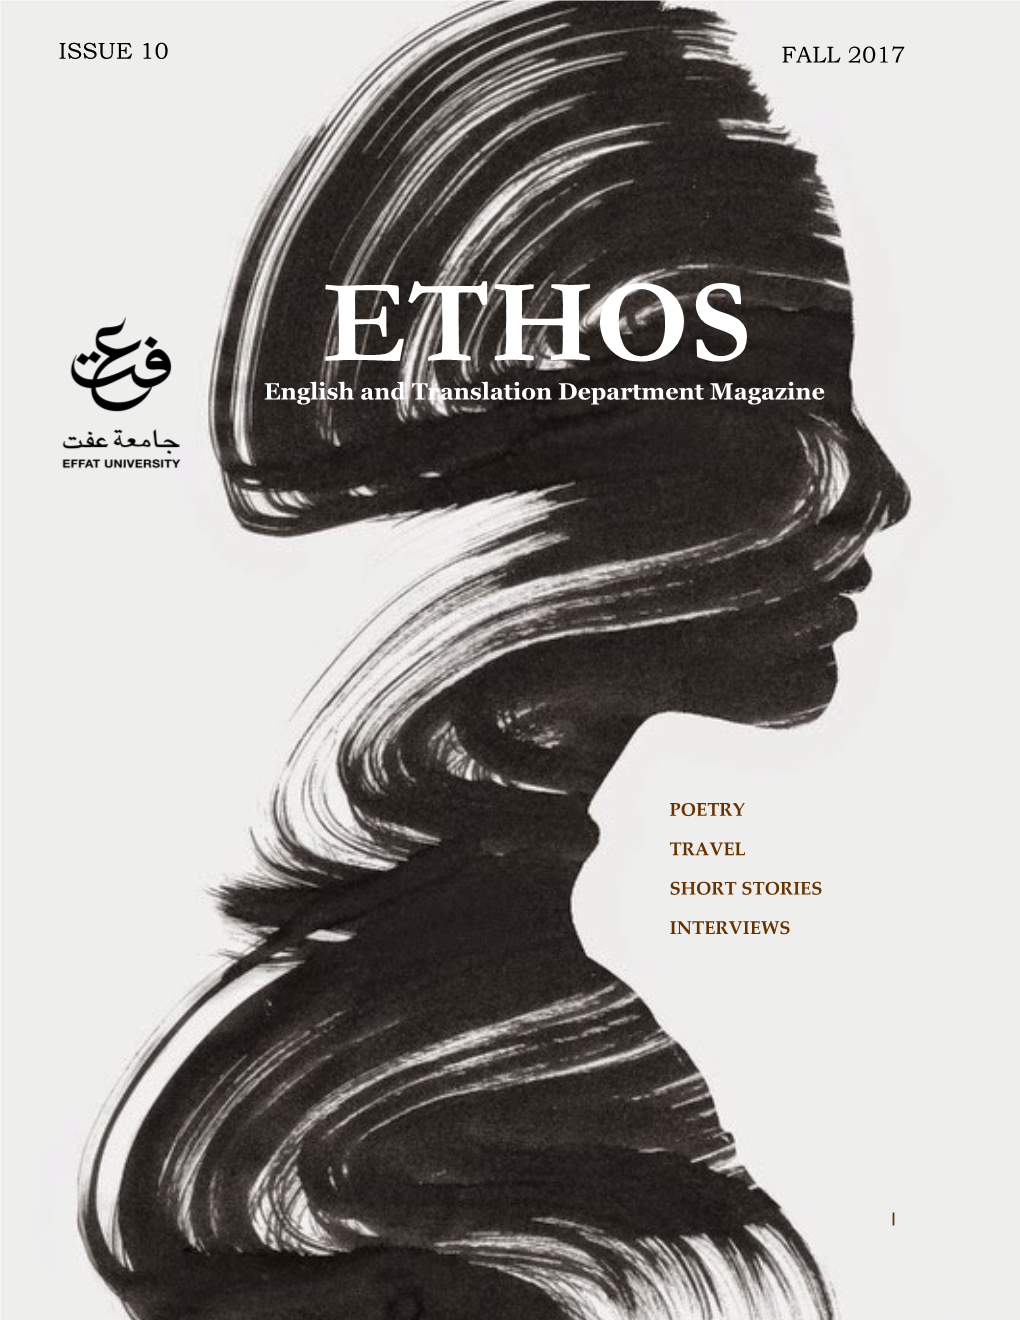 ISSUE 10 FALL 2017 English and Translation Department Magazine